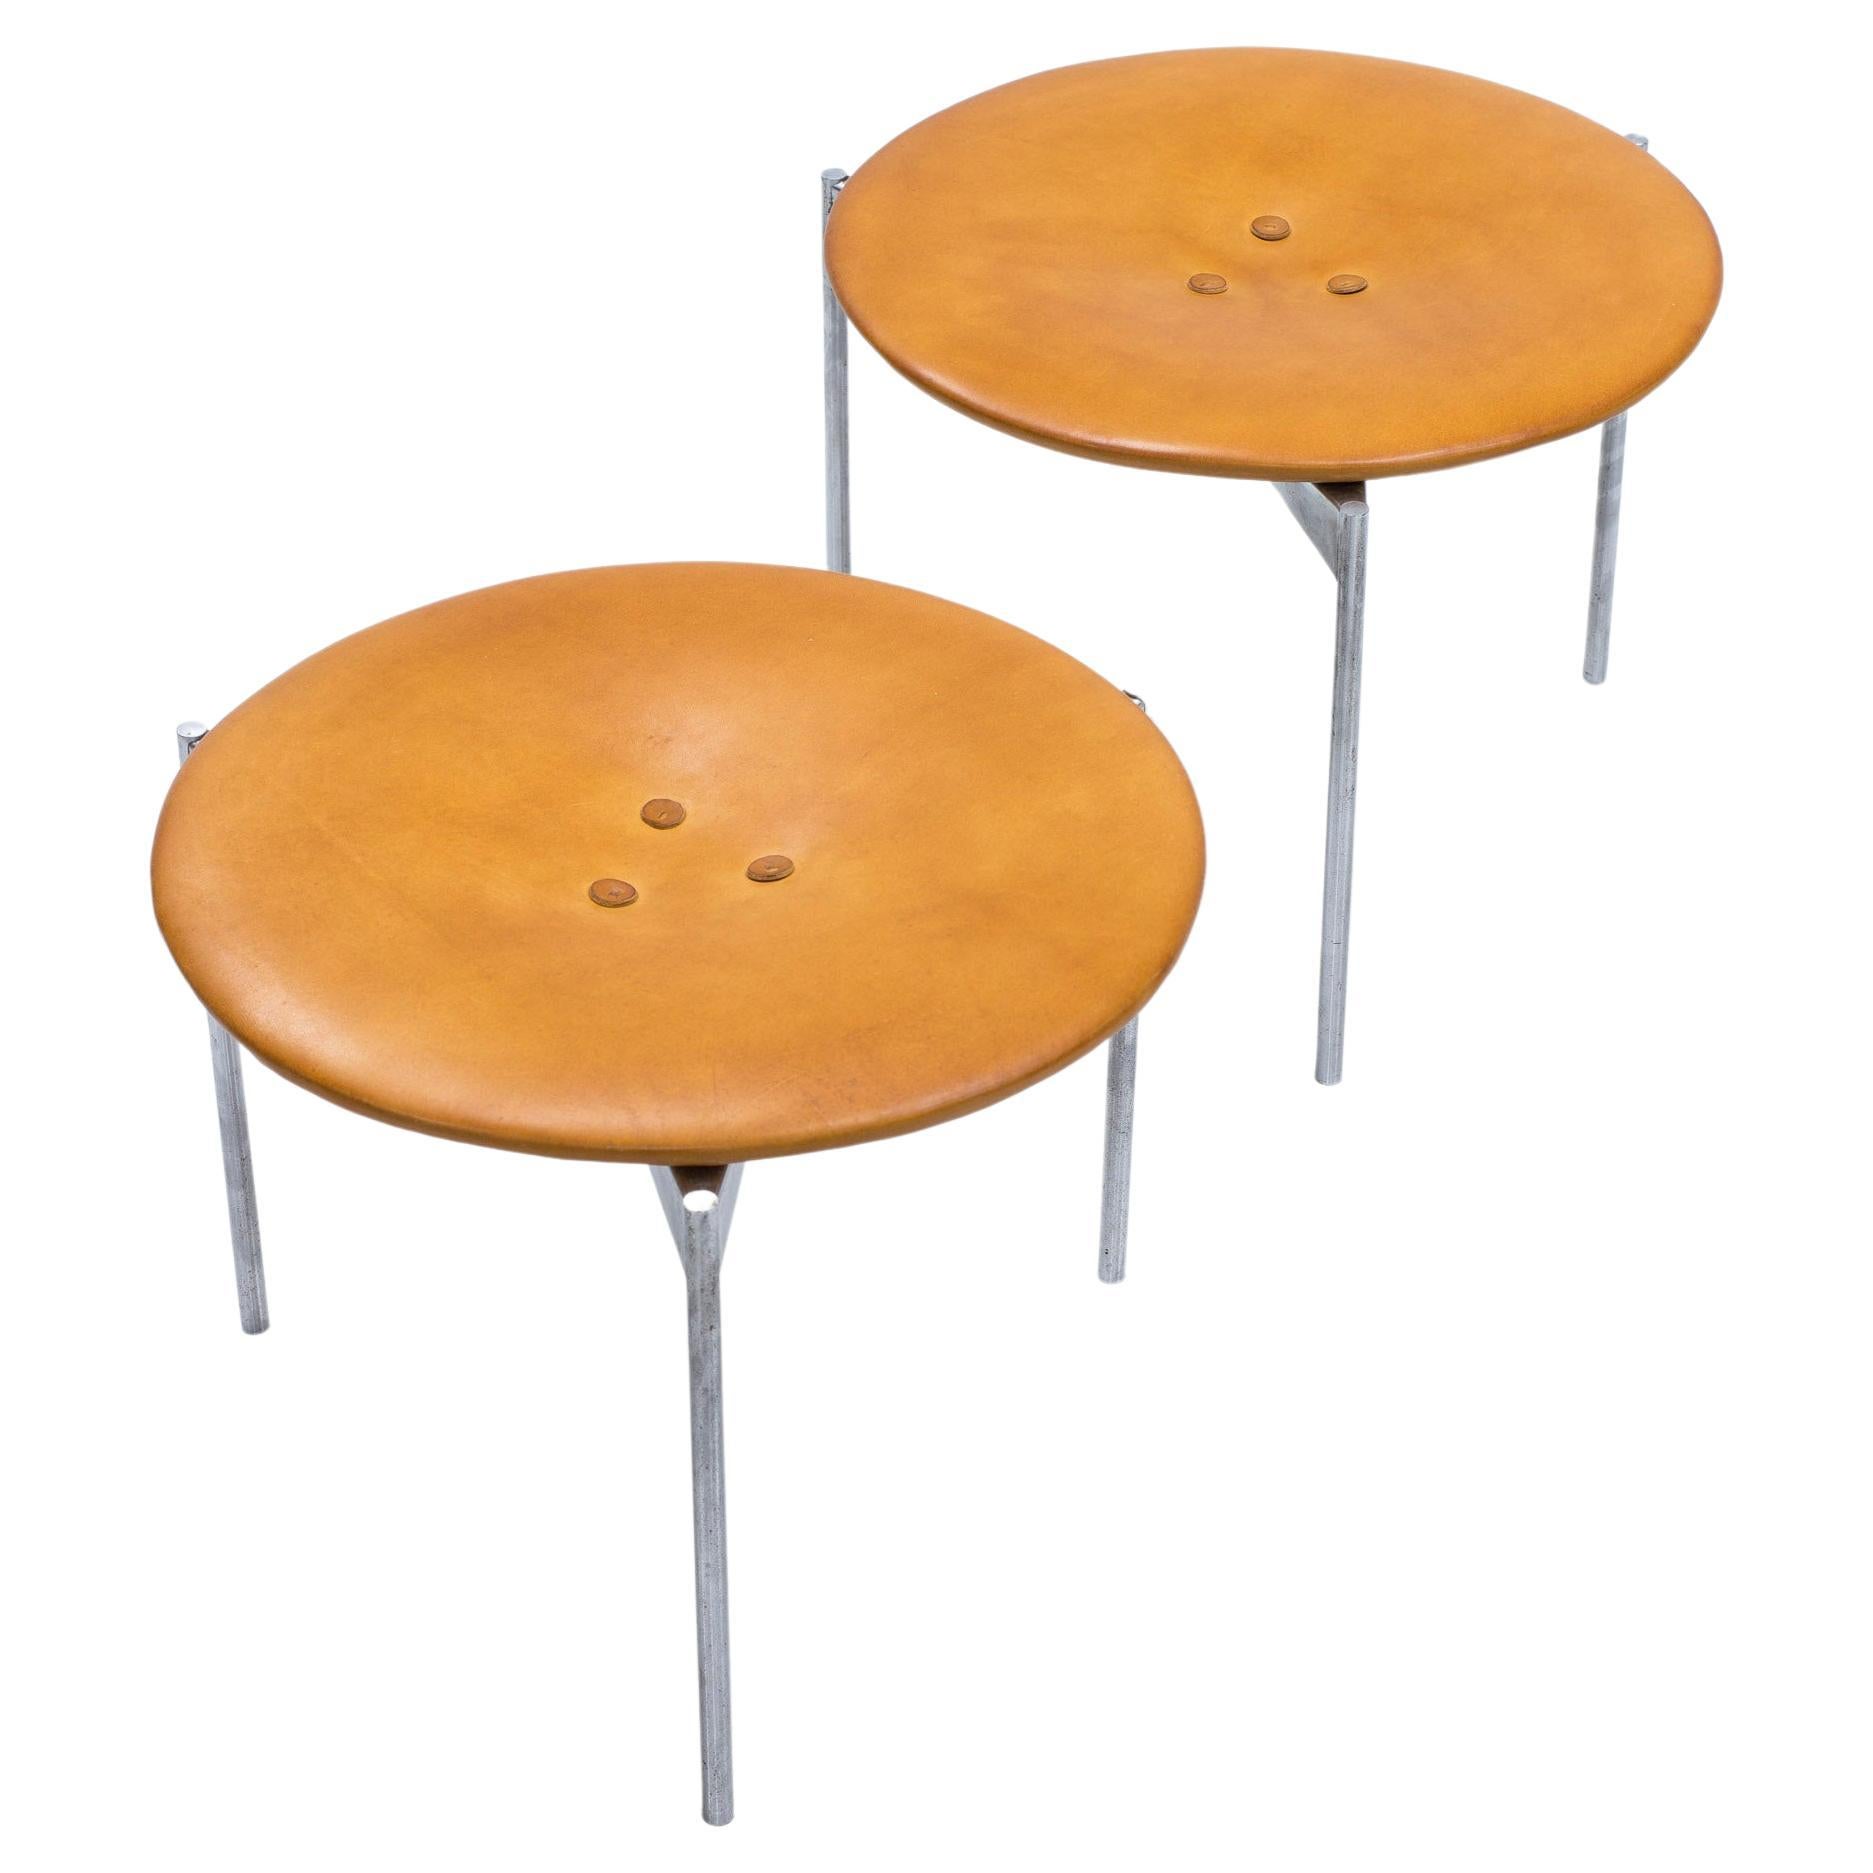 Patinated leather and Steel Stools by Uno & Östen Kristiansson, Sweden, 1960s For Sale